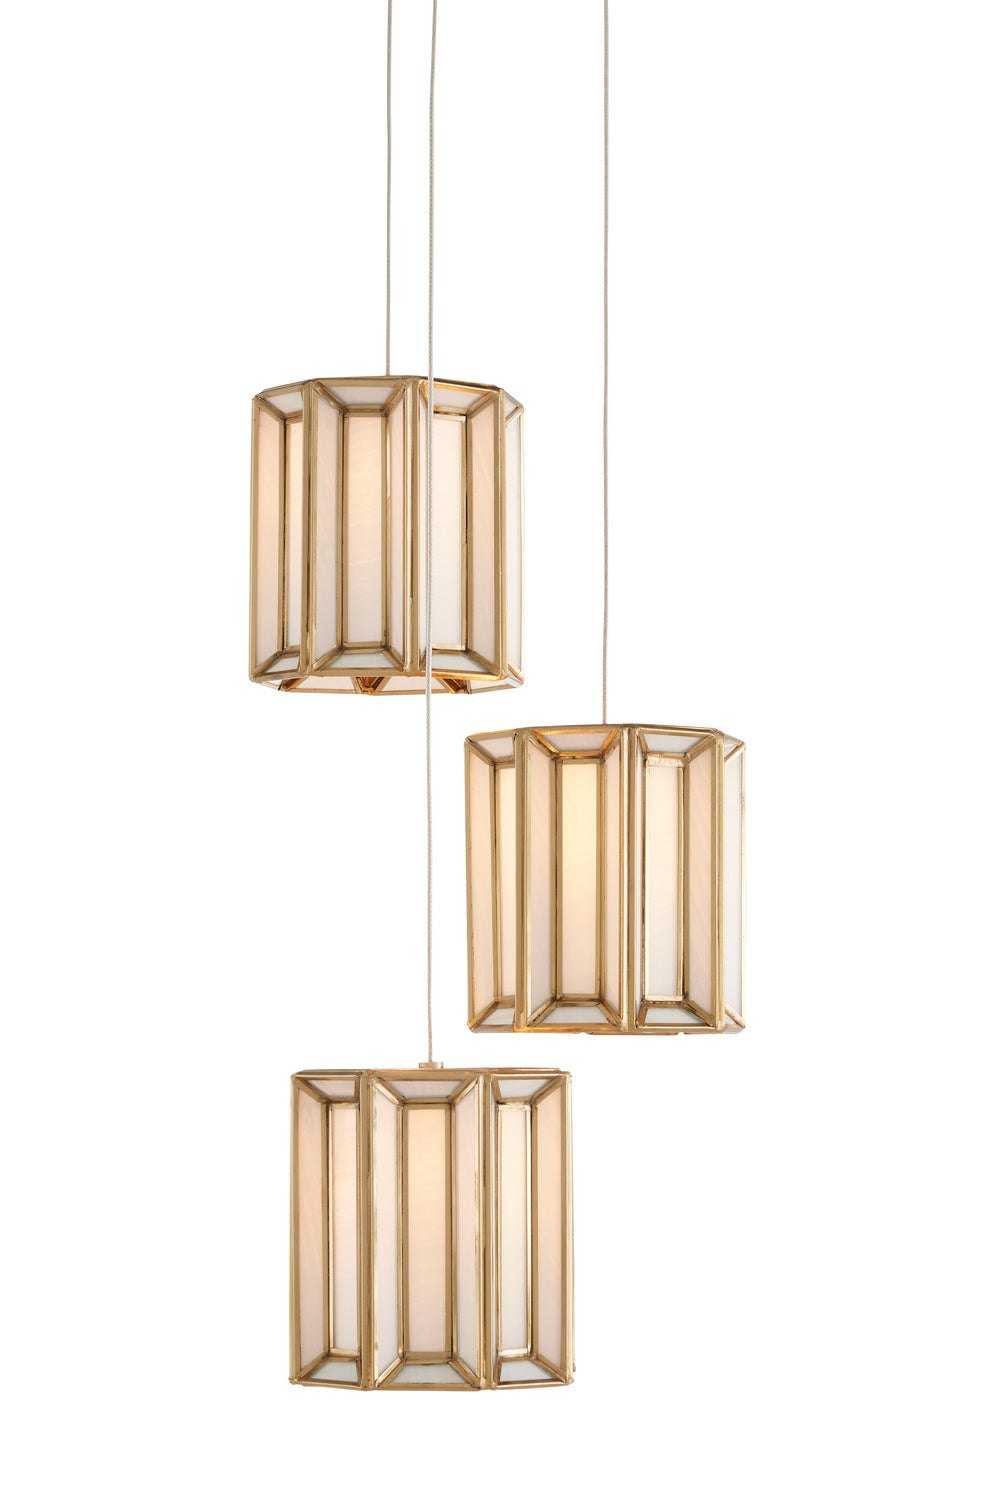 Three Light Pendant from the Daze collection in Antique Brass/White/Painted Silver finish